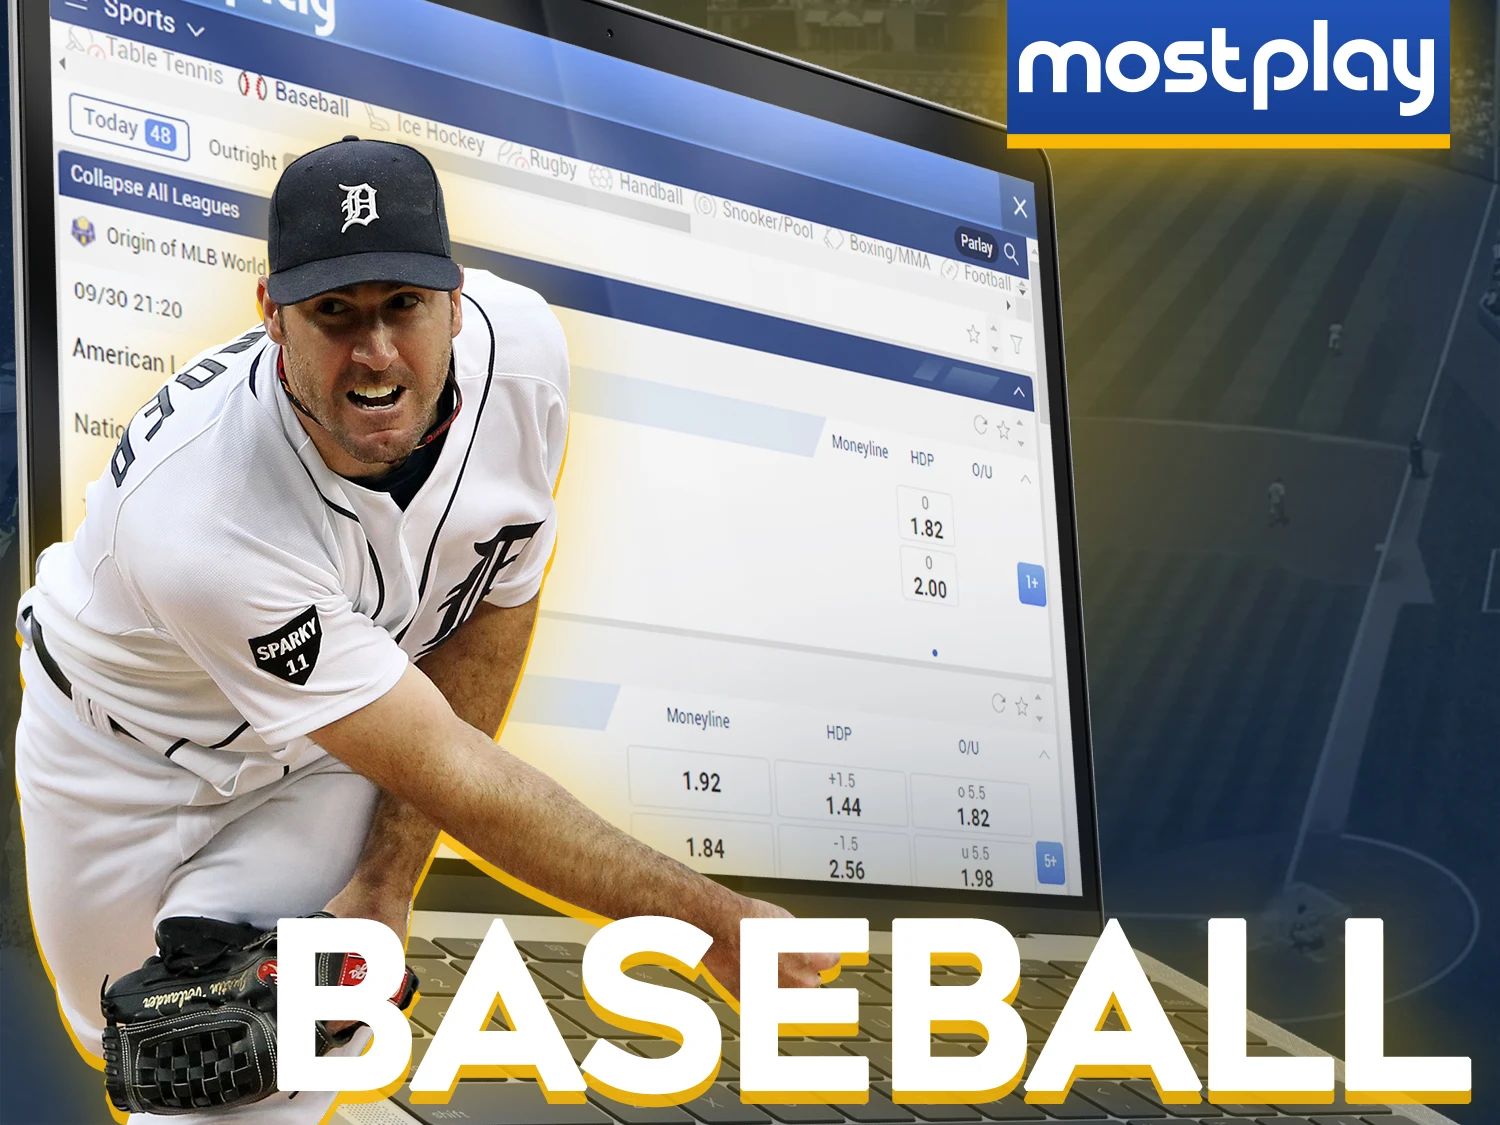 Bet on the most popular sport in America at the Mostplay.